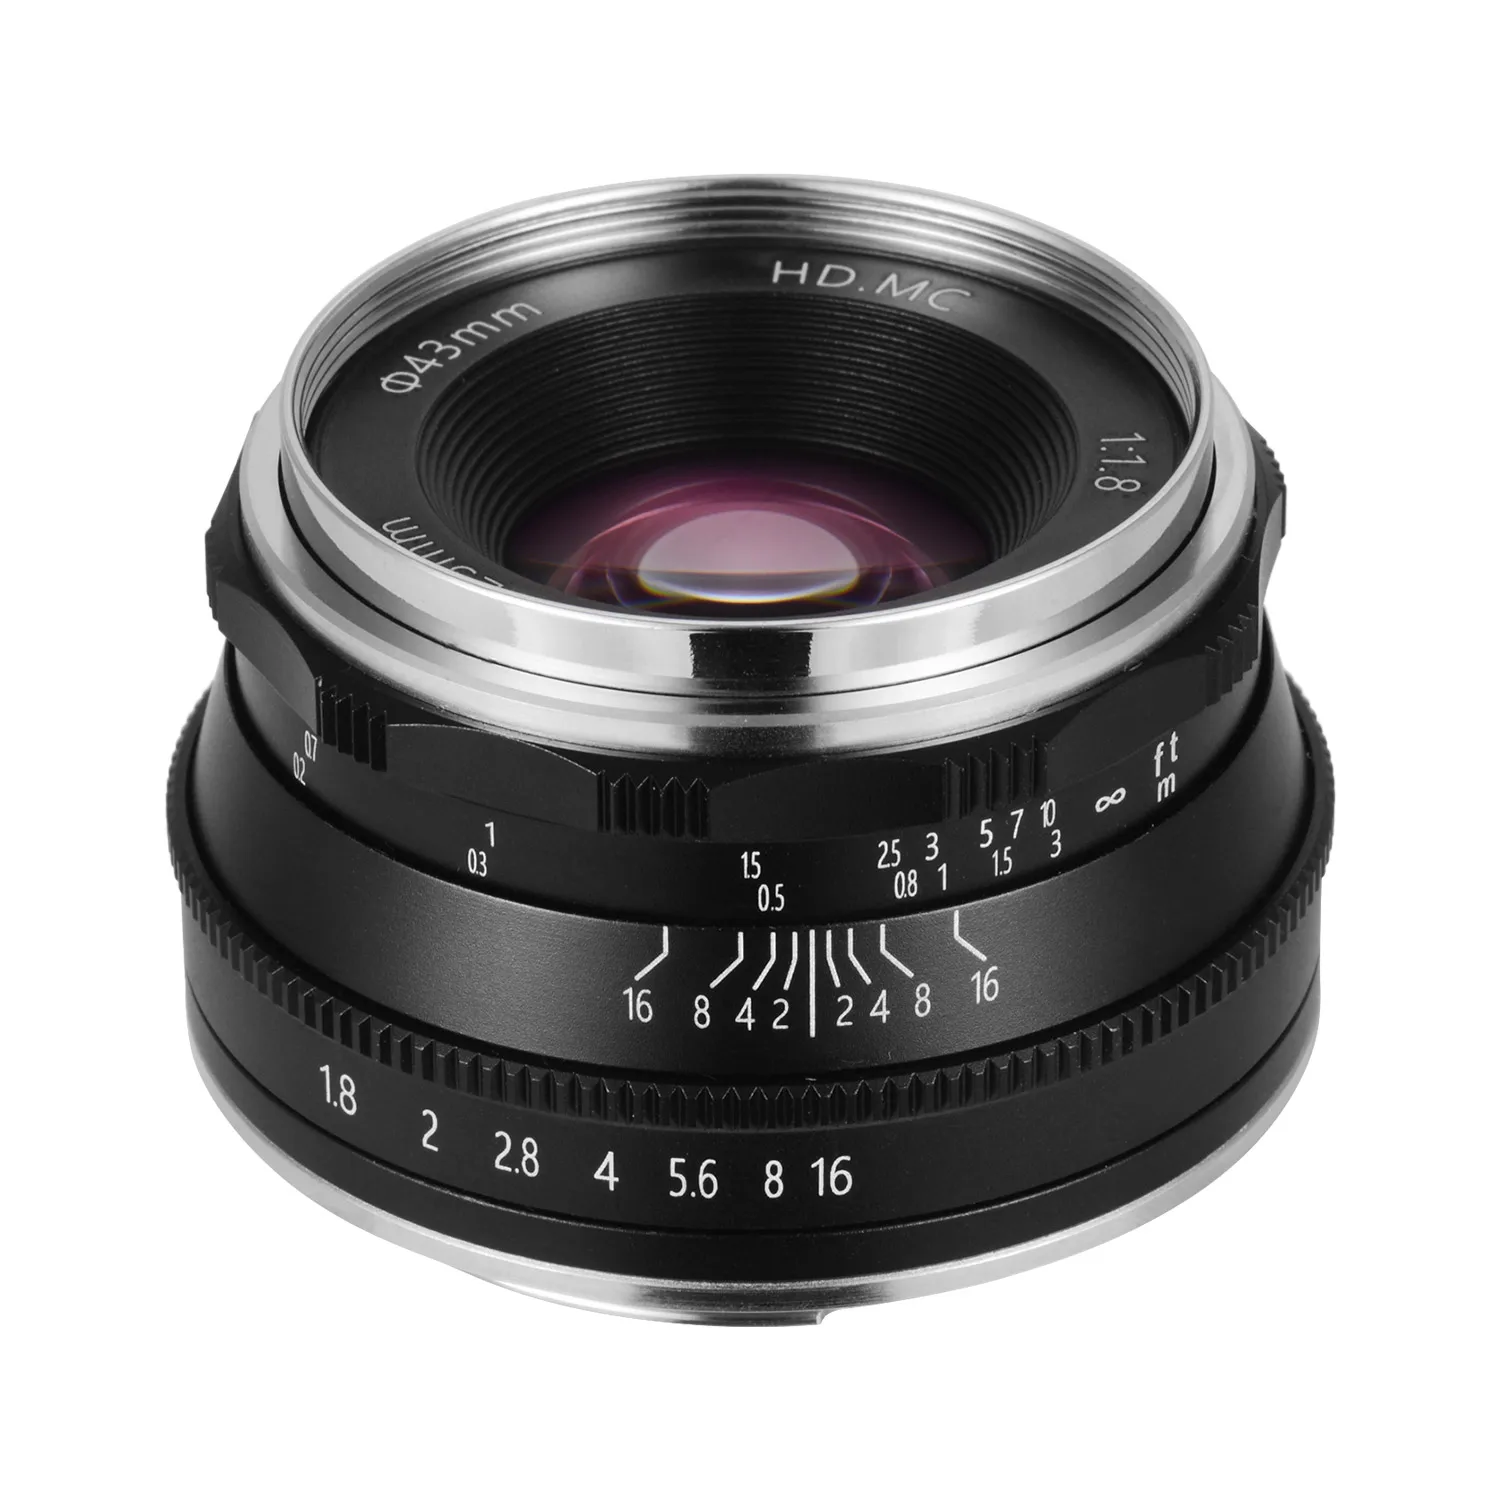 

Andoer 25mm F1.8 Manual Focus Lens Large Aperture Compatible with Fuji FX-Mount/M43-Mount/EOS M-Mount/Mirrorless Cameras Lens